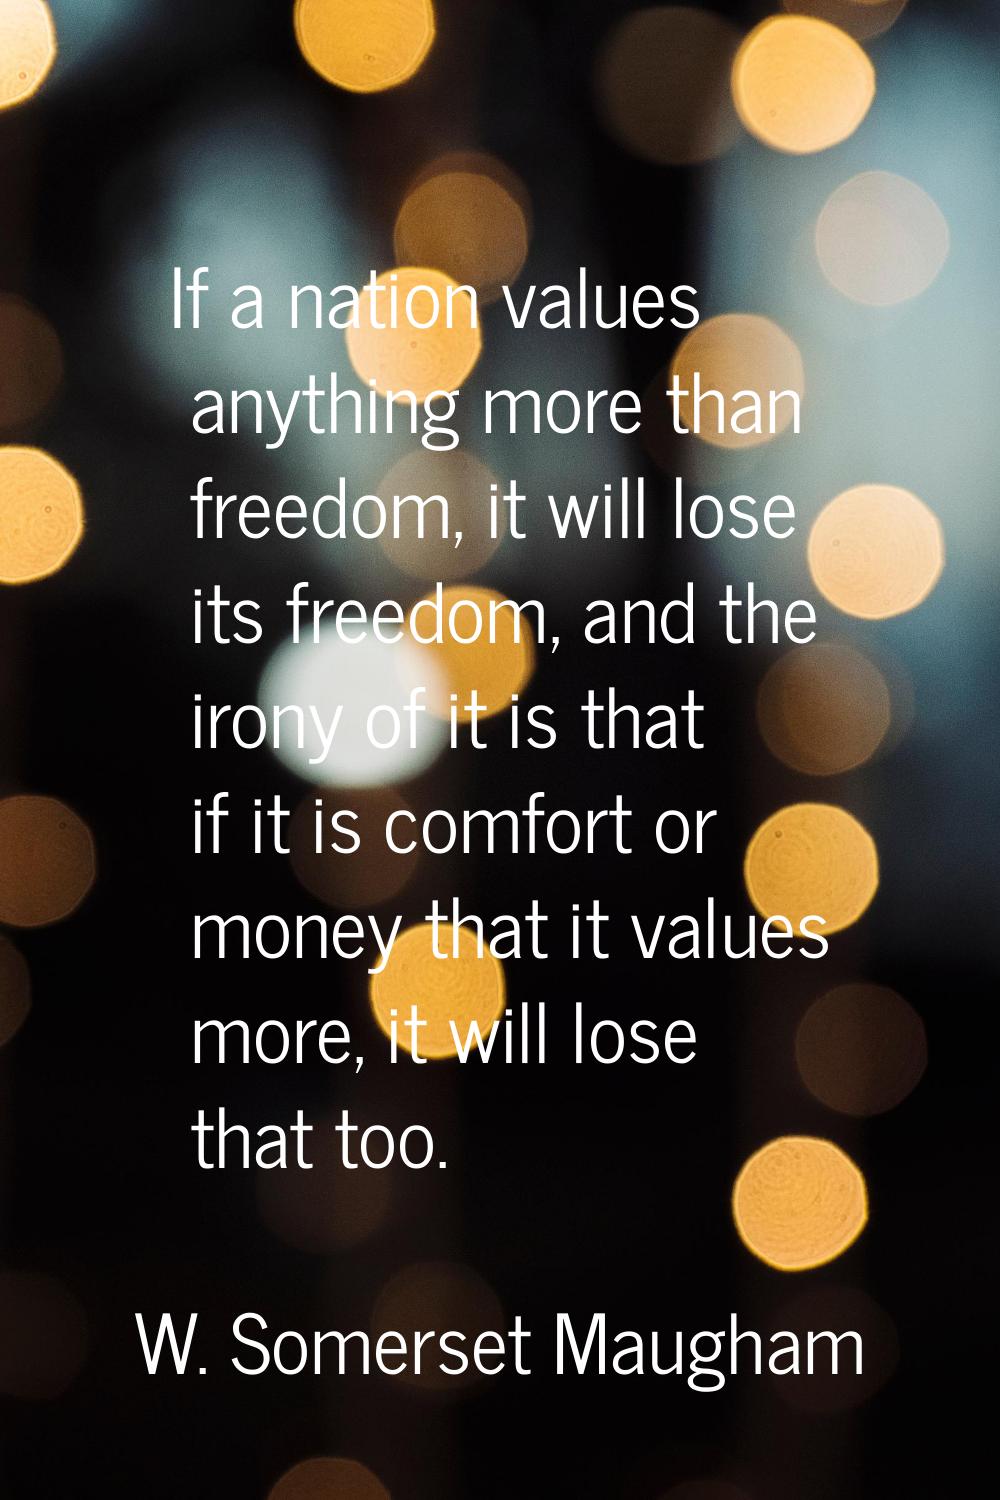 If a nation values anything more than freedom, it will lose its freedom, and the irony of it is tha